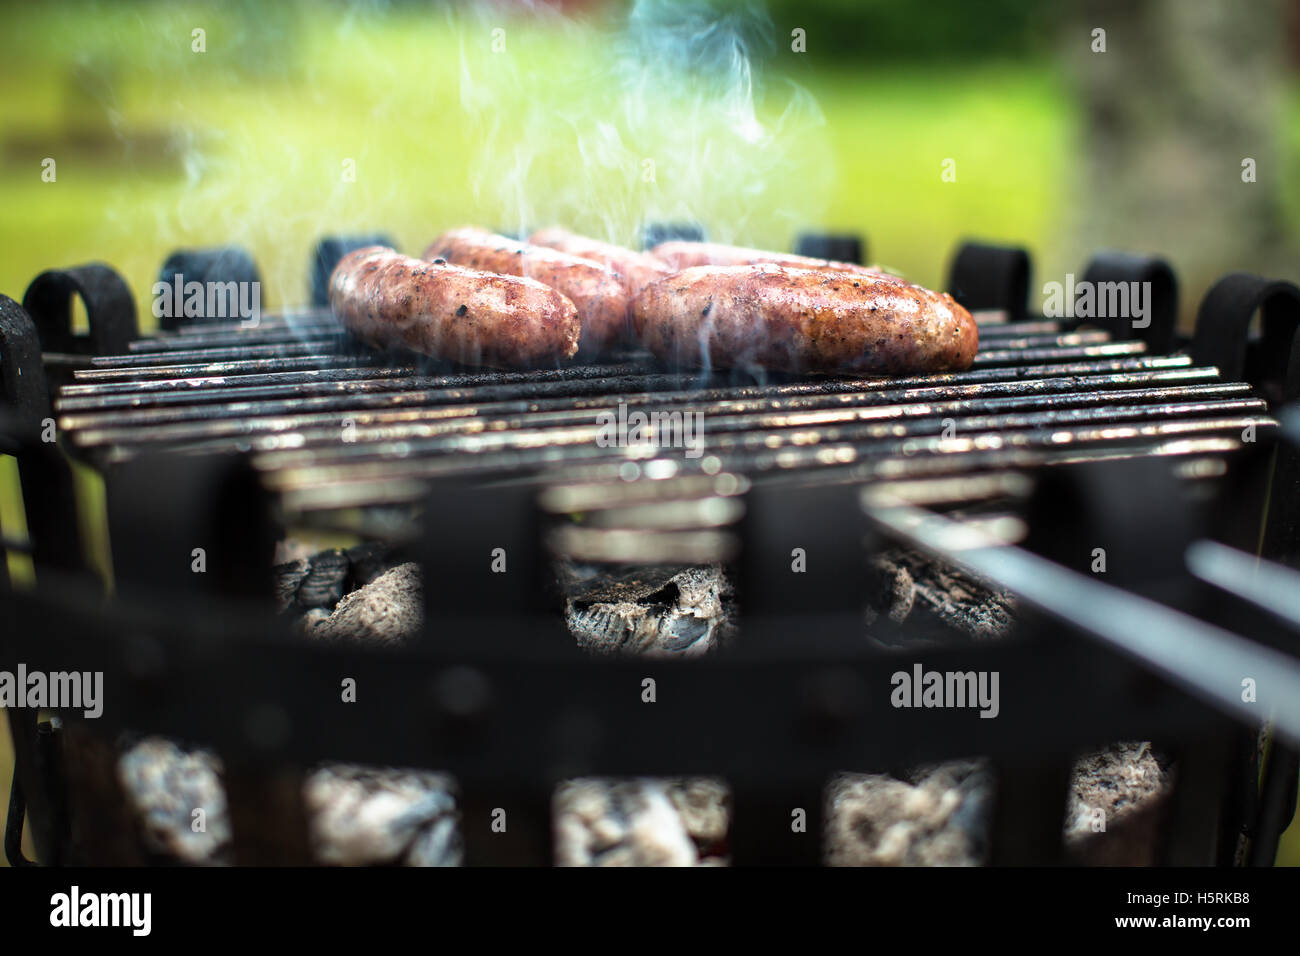 A couple of sausages on the barbecue with hot coal and smoke Stock Photo